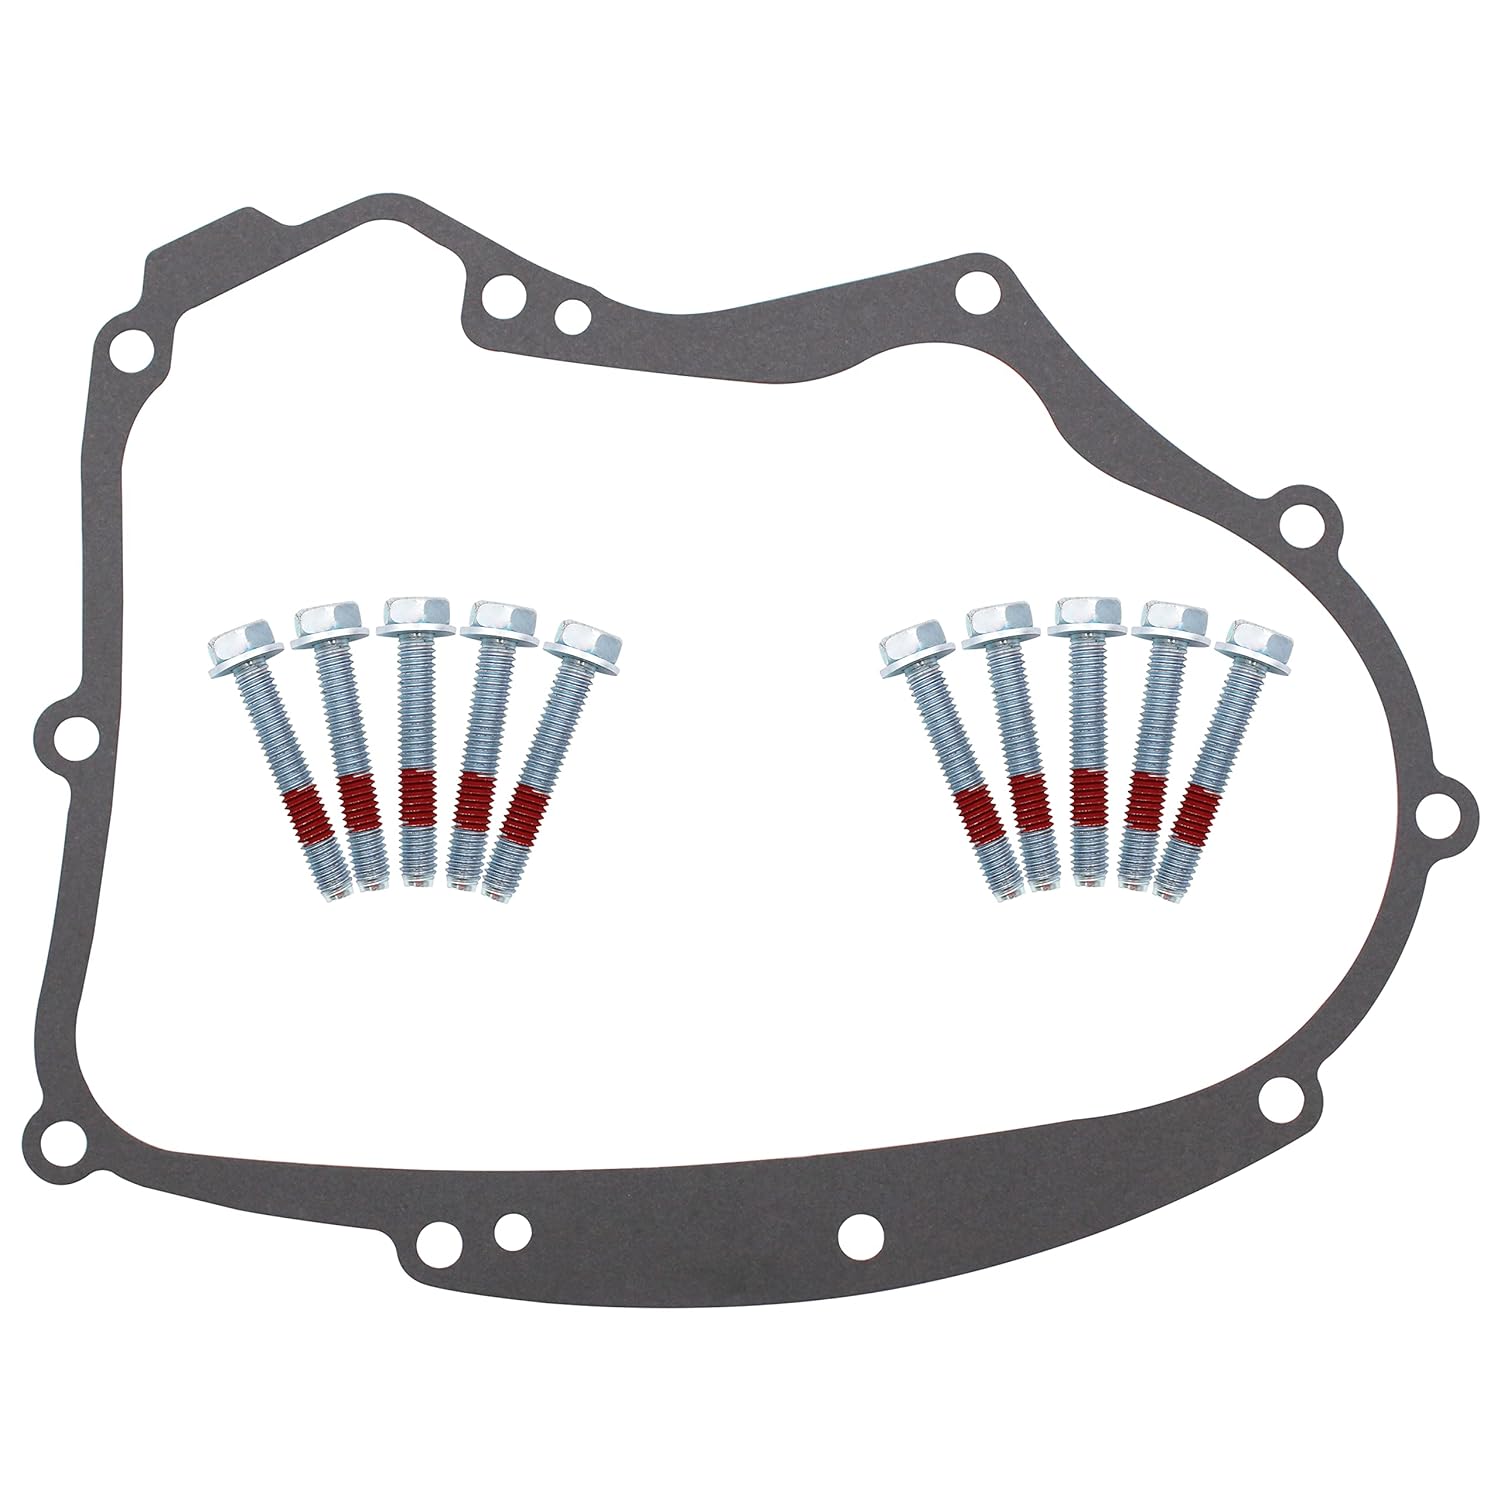 FlyingAMZ 594195 Crankcase Gasket Kit Parts Accessories Lawnmowers with Bolts and Crank Case Gasket Replace The Model 591911, 697227, 690945, 273488 For Briggs and Stratton Small Gasoline Engines